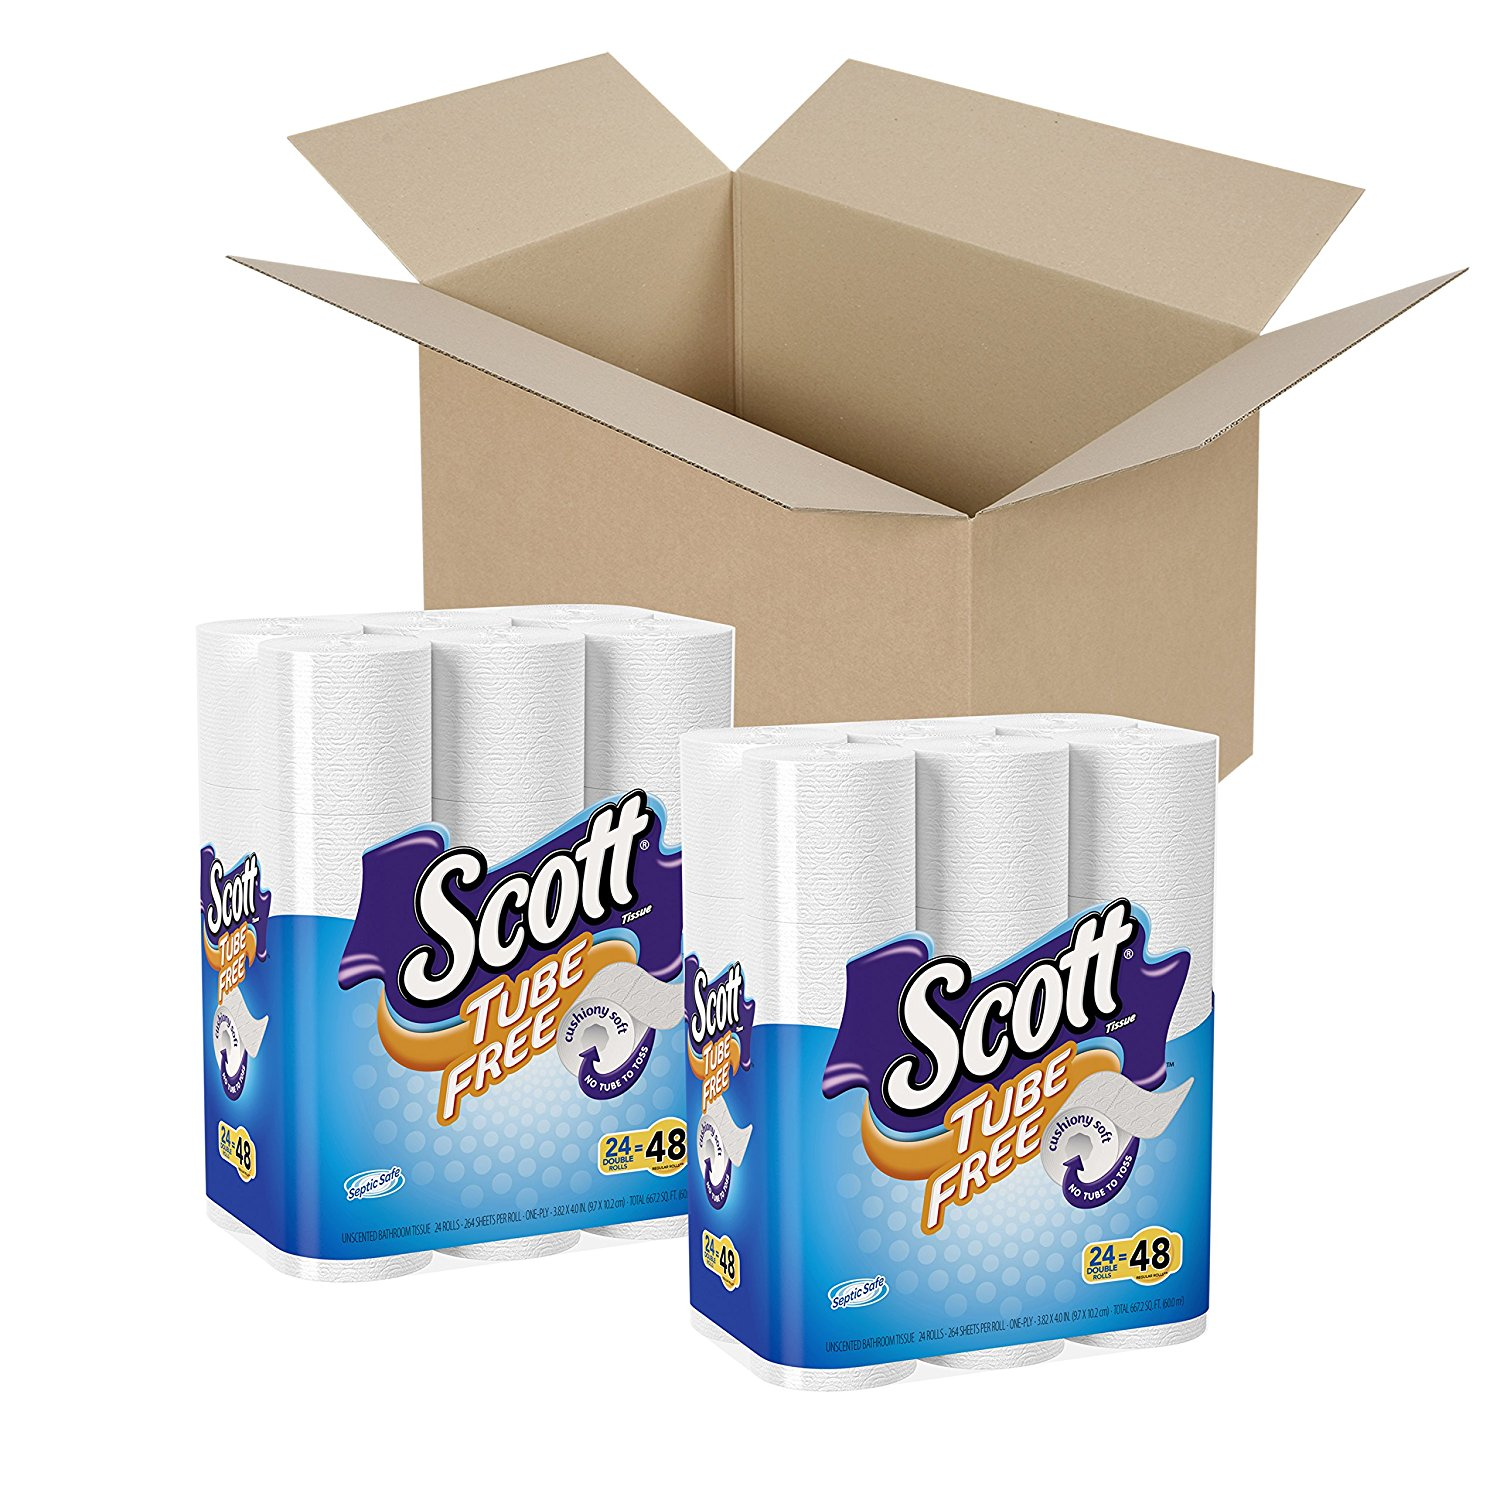 Scott Tube-Free Toilet Paper 48 Count Only $11.11 Shipped!